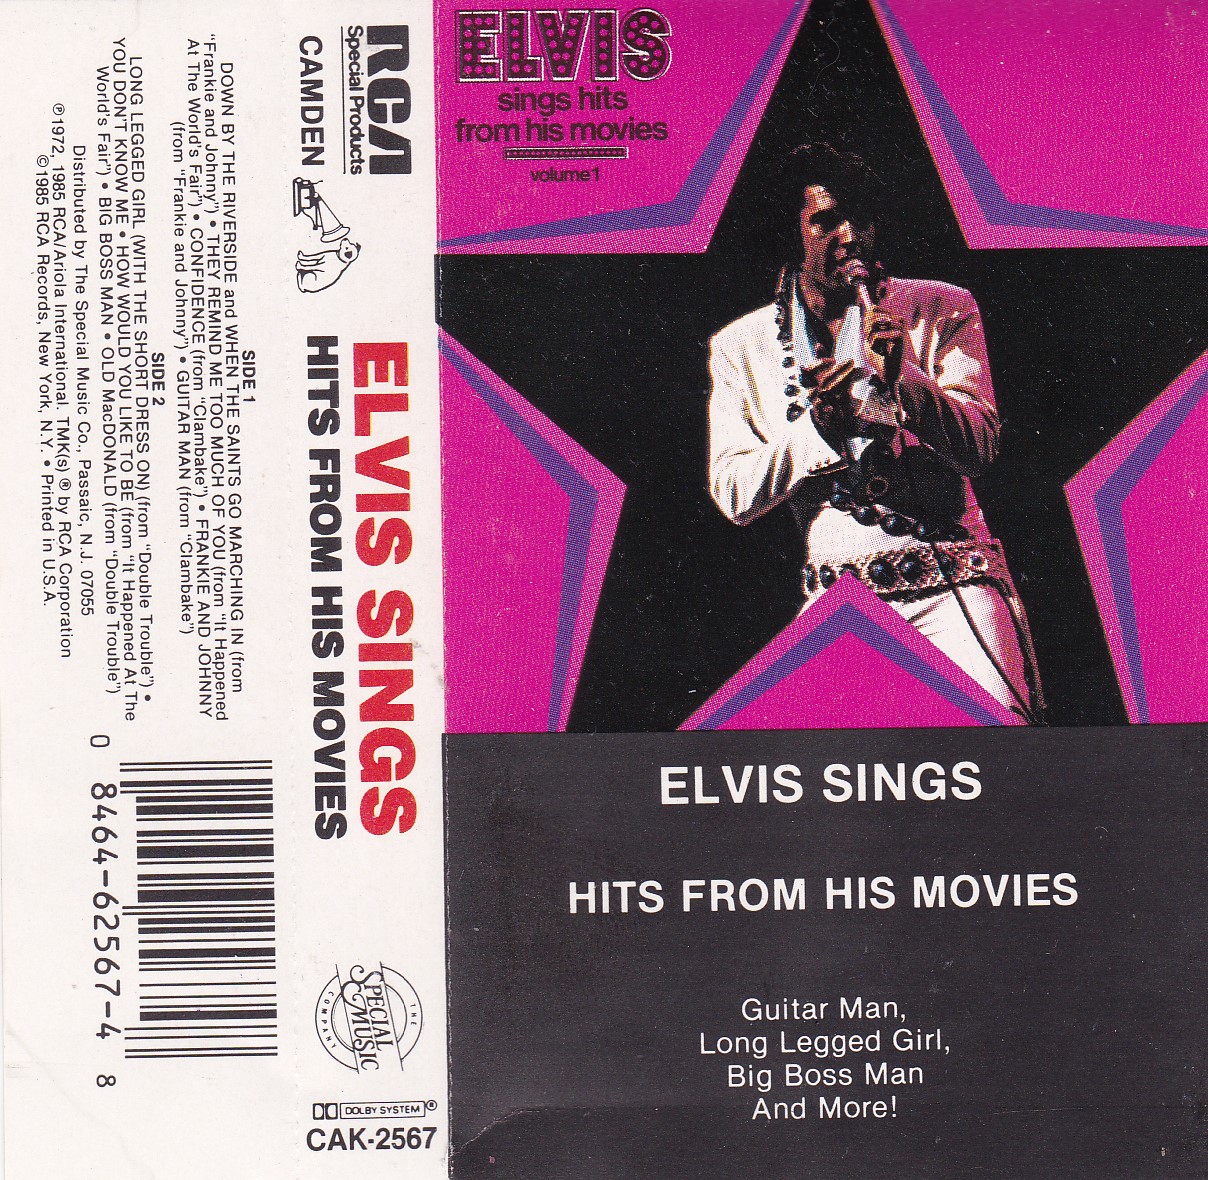 who sings with elvis on the song tell me why